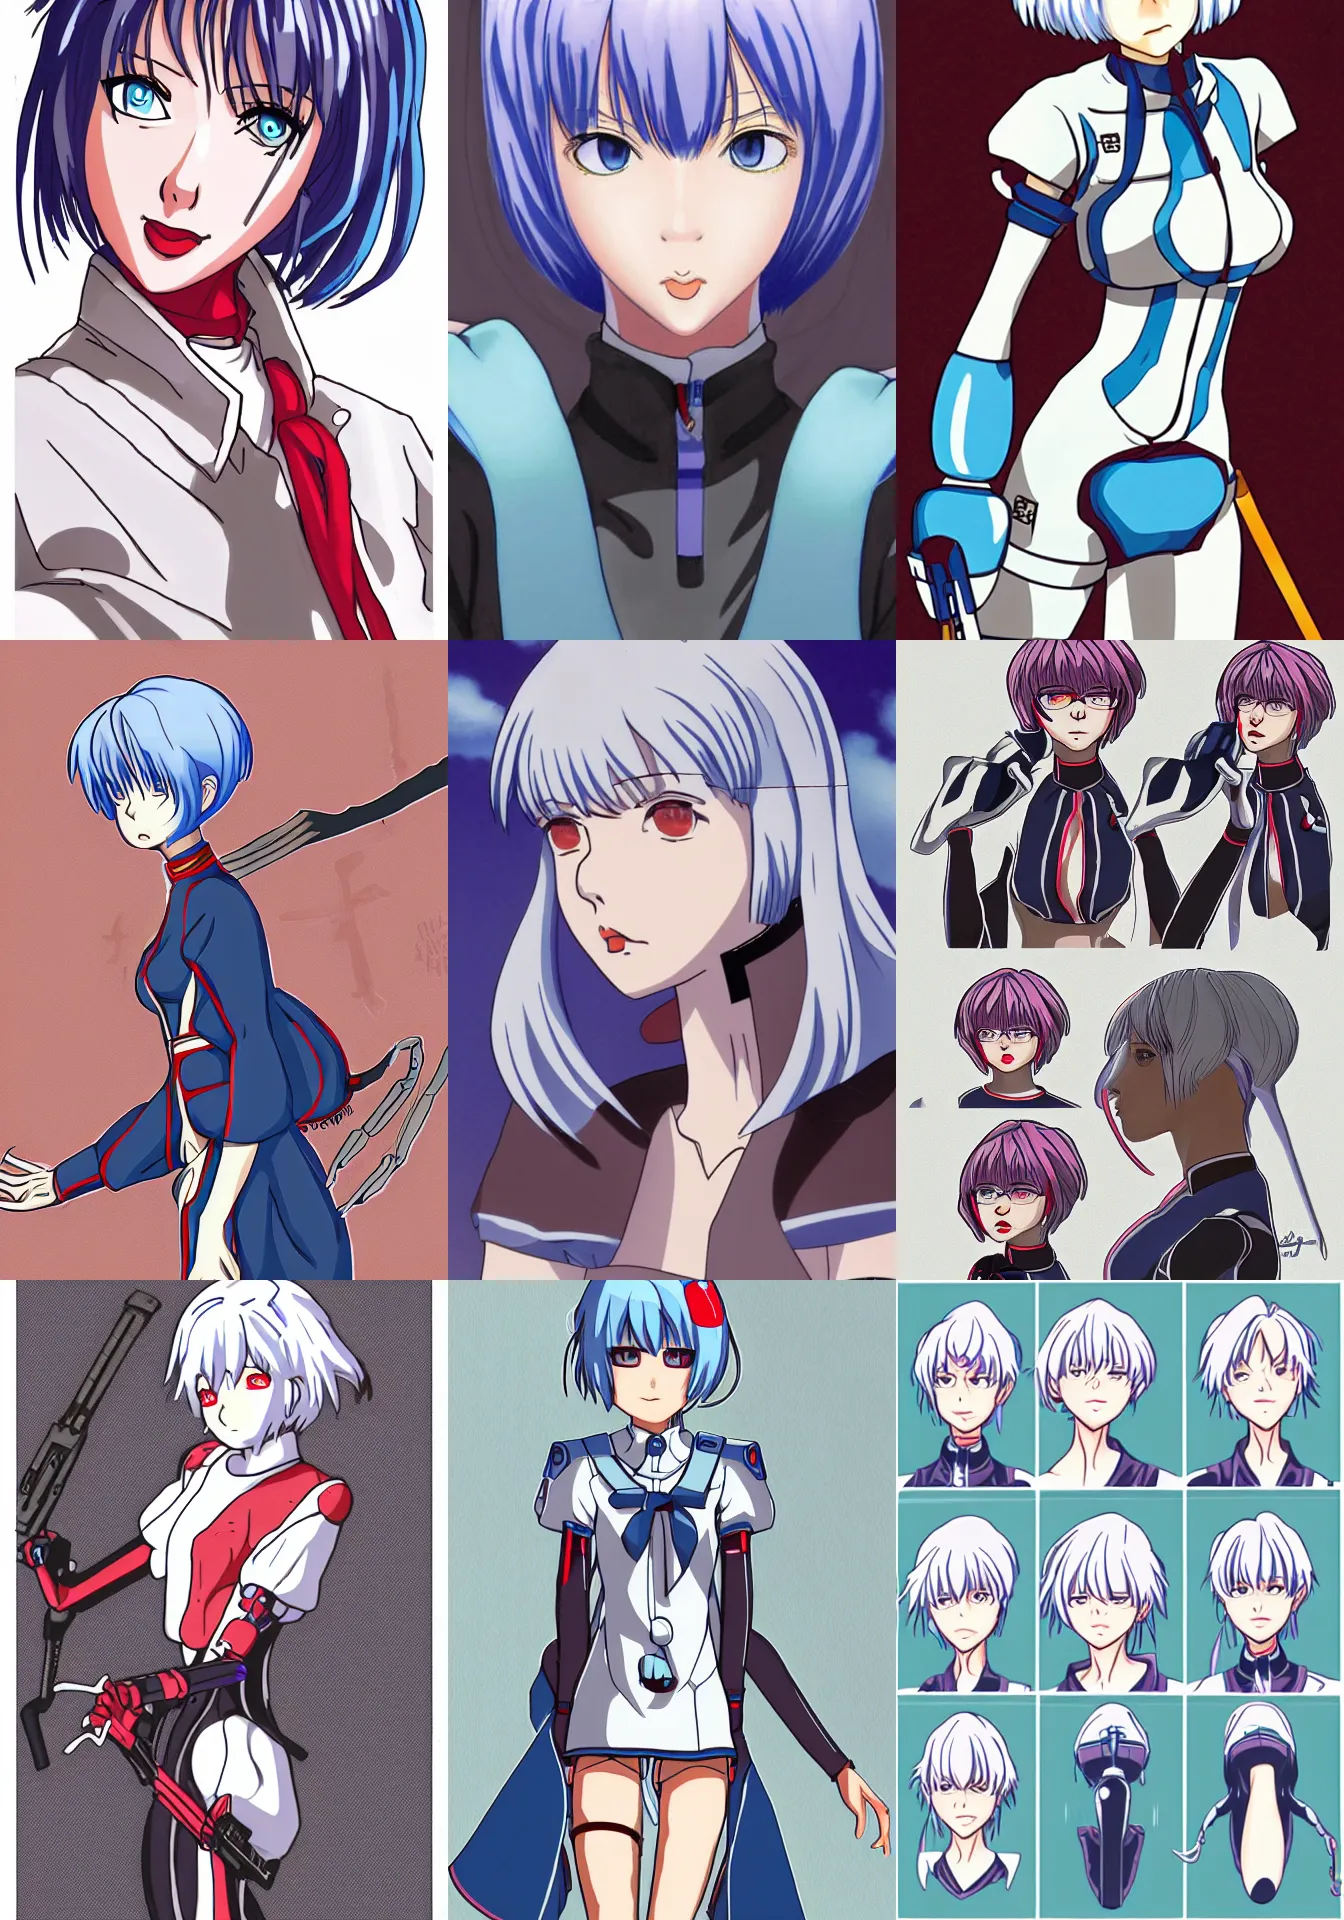 Prompt: character illustrations of rei ayanami